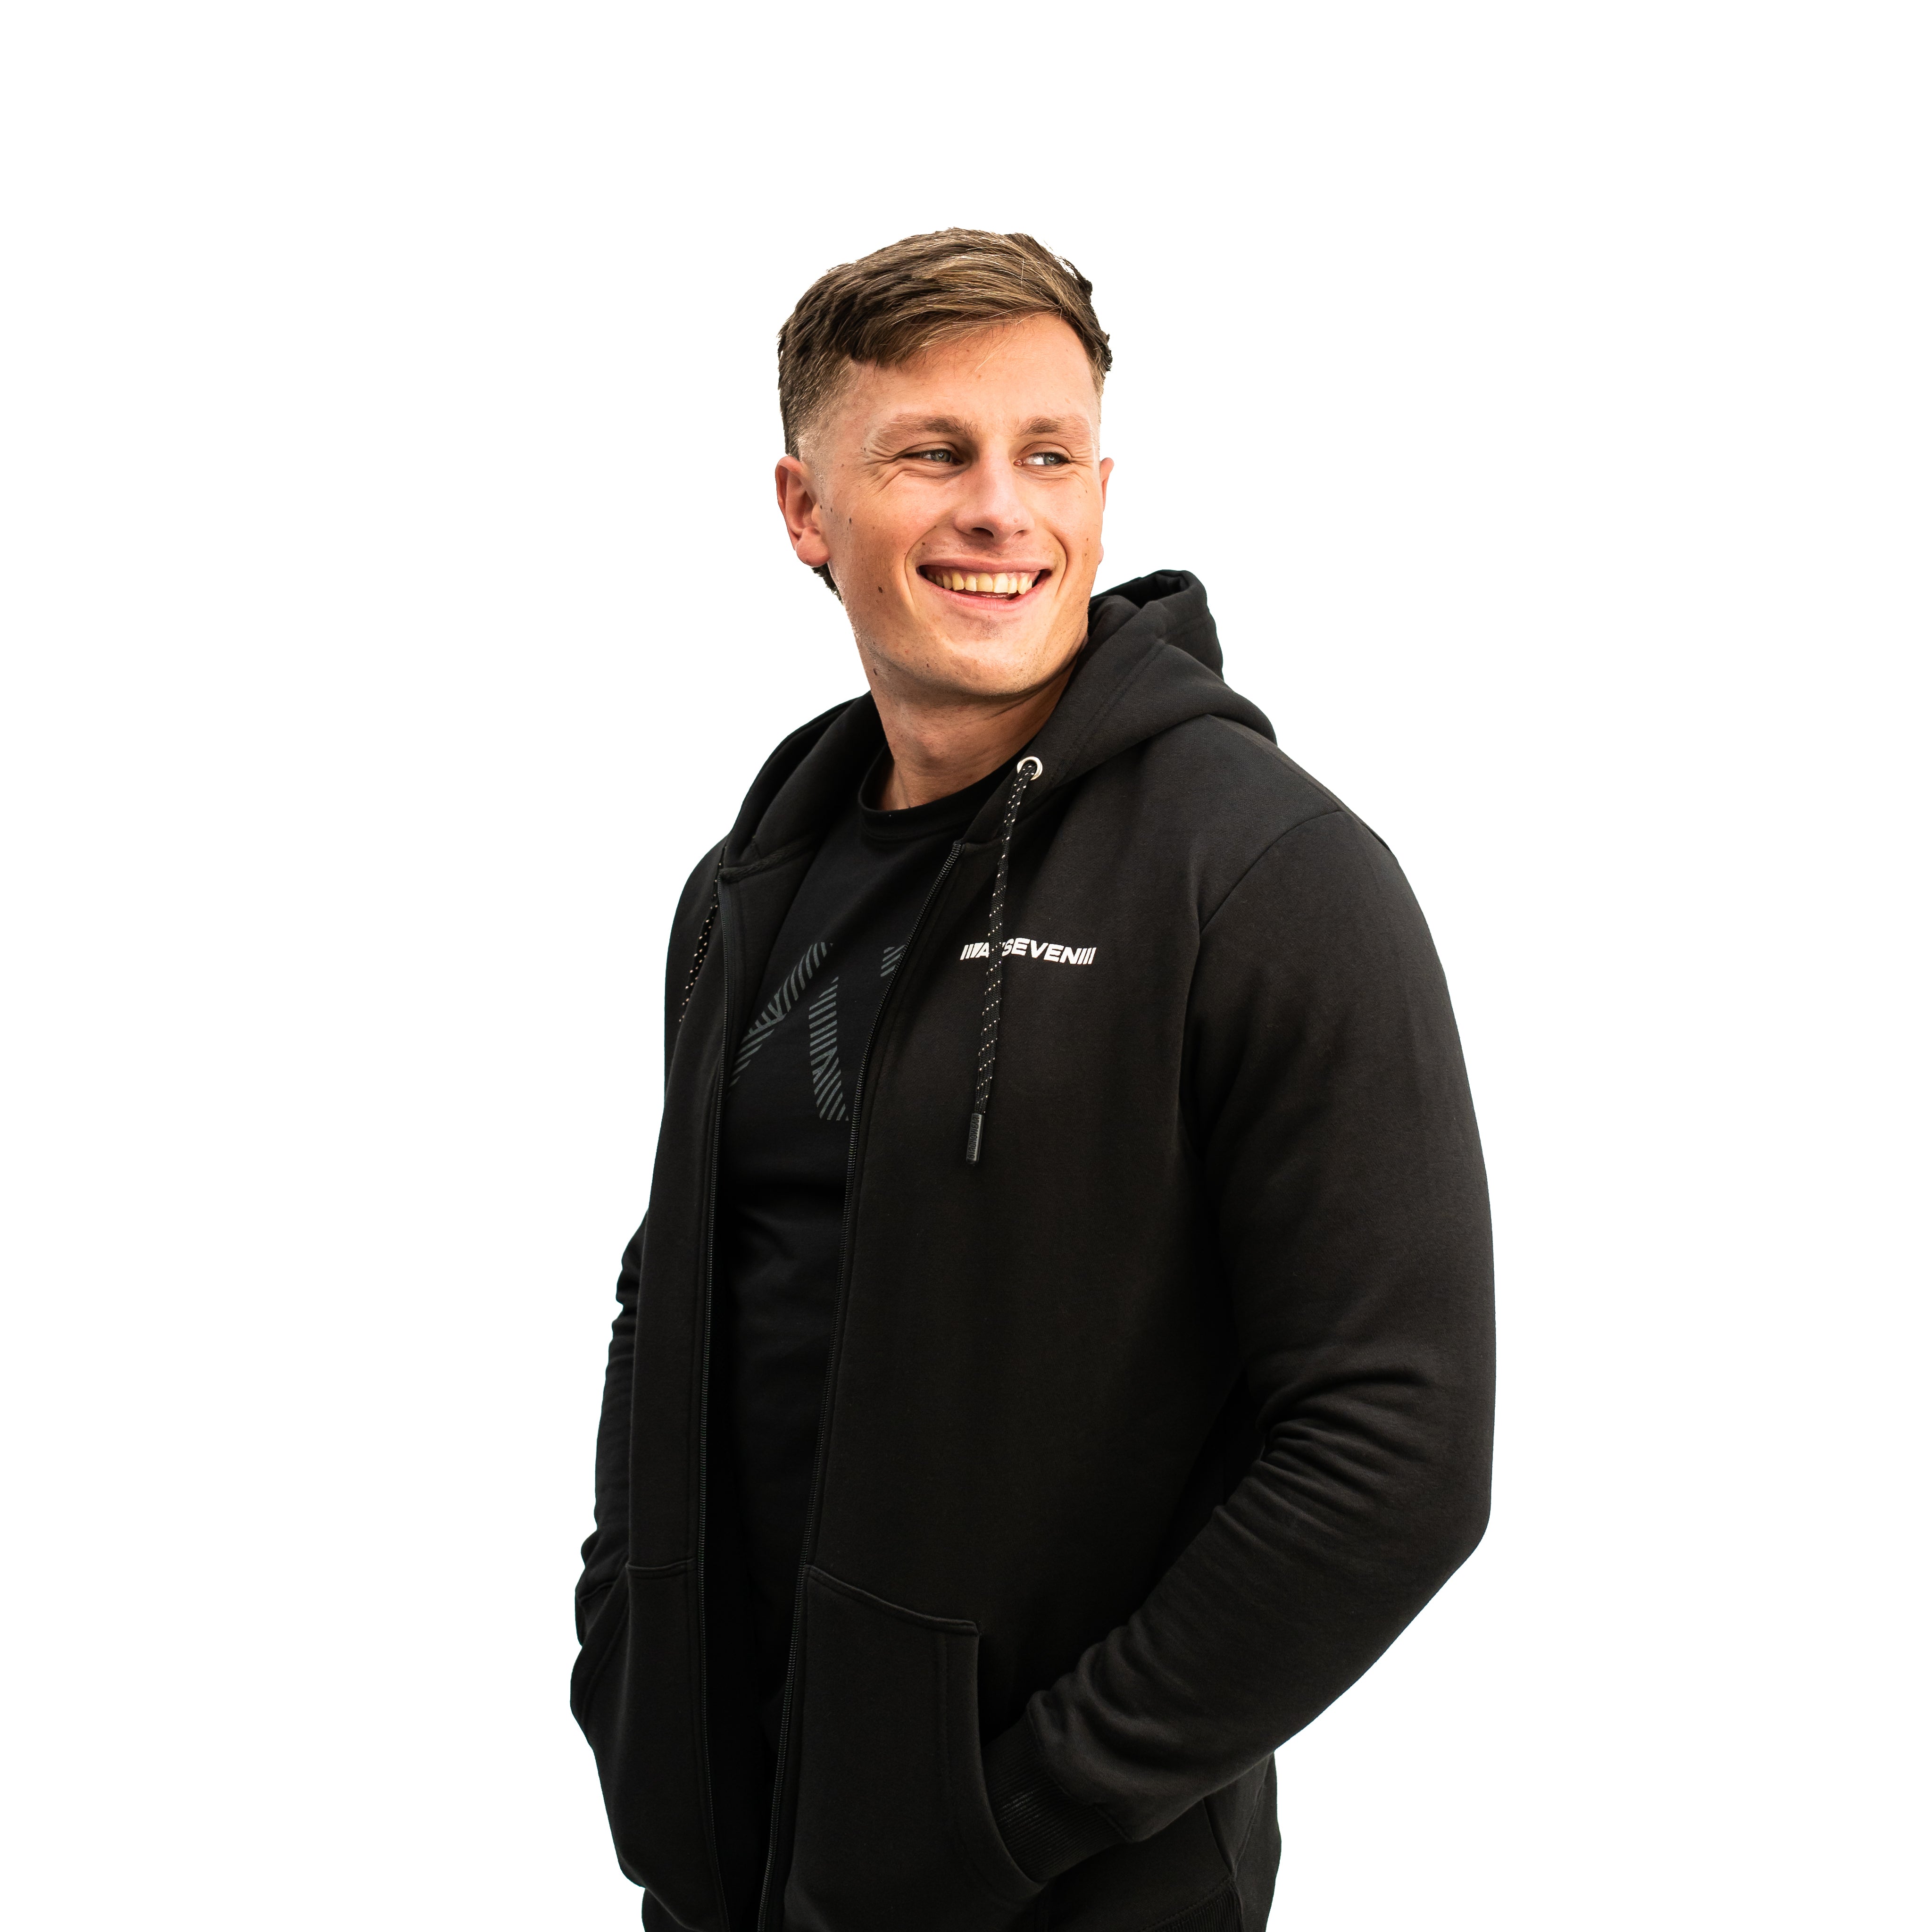 LTB Tide is a zip up hoodie great for casual wear or lifting in the gym. Purchase LTB Tide zip up hoodie in UK and Europe from A7 UK. A7 have the best Bar Grip Tshirts, shipping to UK and Europe from A7 UK. LTB TIde is our newest design on our zip up hoodie. A black hoodie with a colourful wave design on the back. A7UK supplies the best Powerlifting apparel for all your workouts. Available in UK and Europe including France, Italy, Germany, the Netherlands, Sweden and Poland.